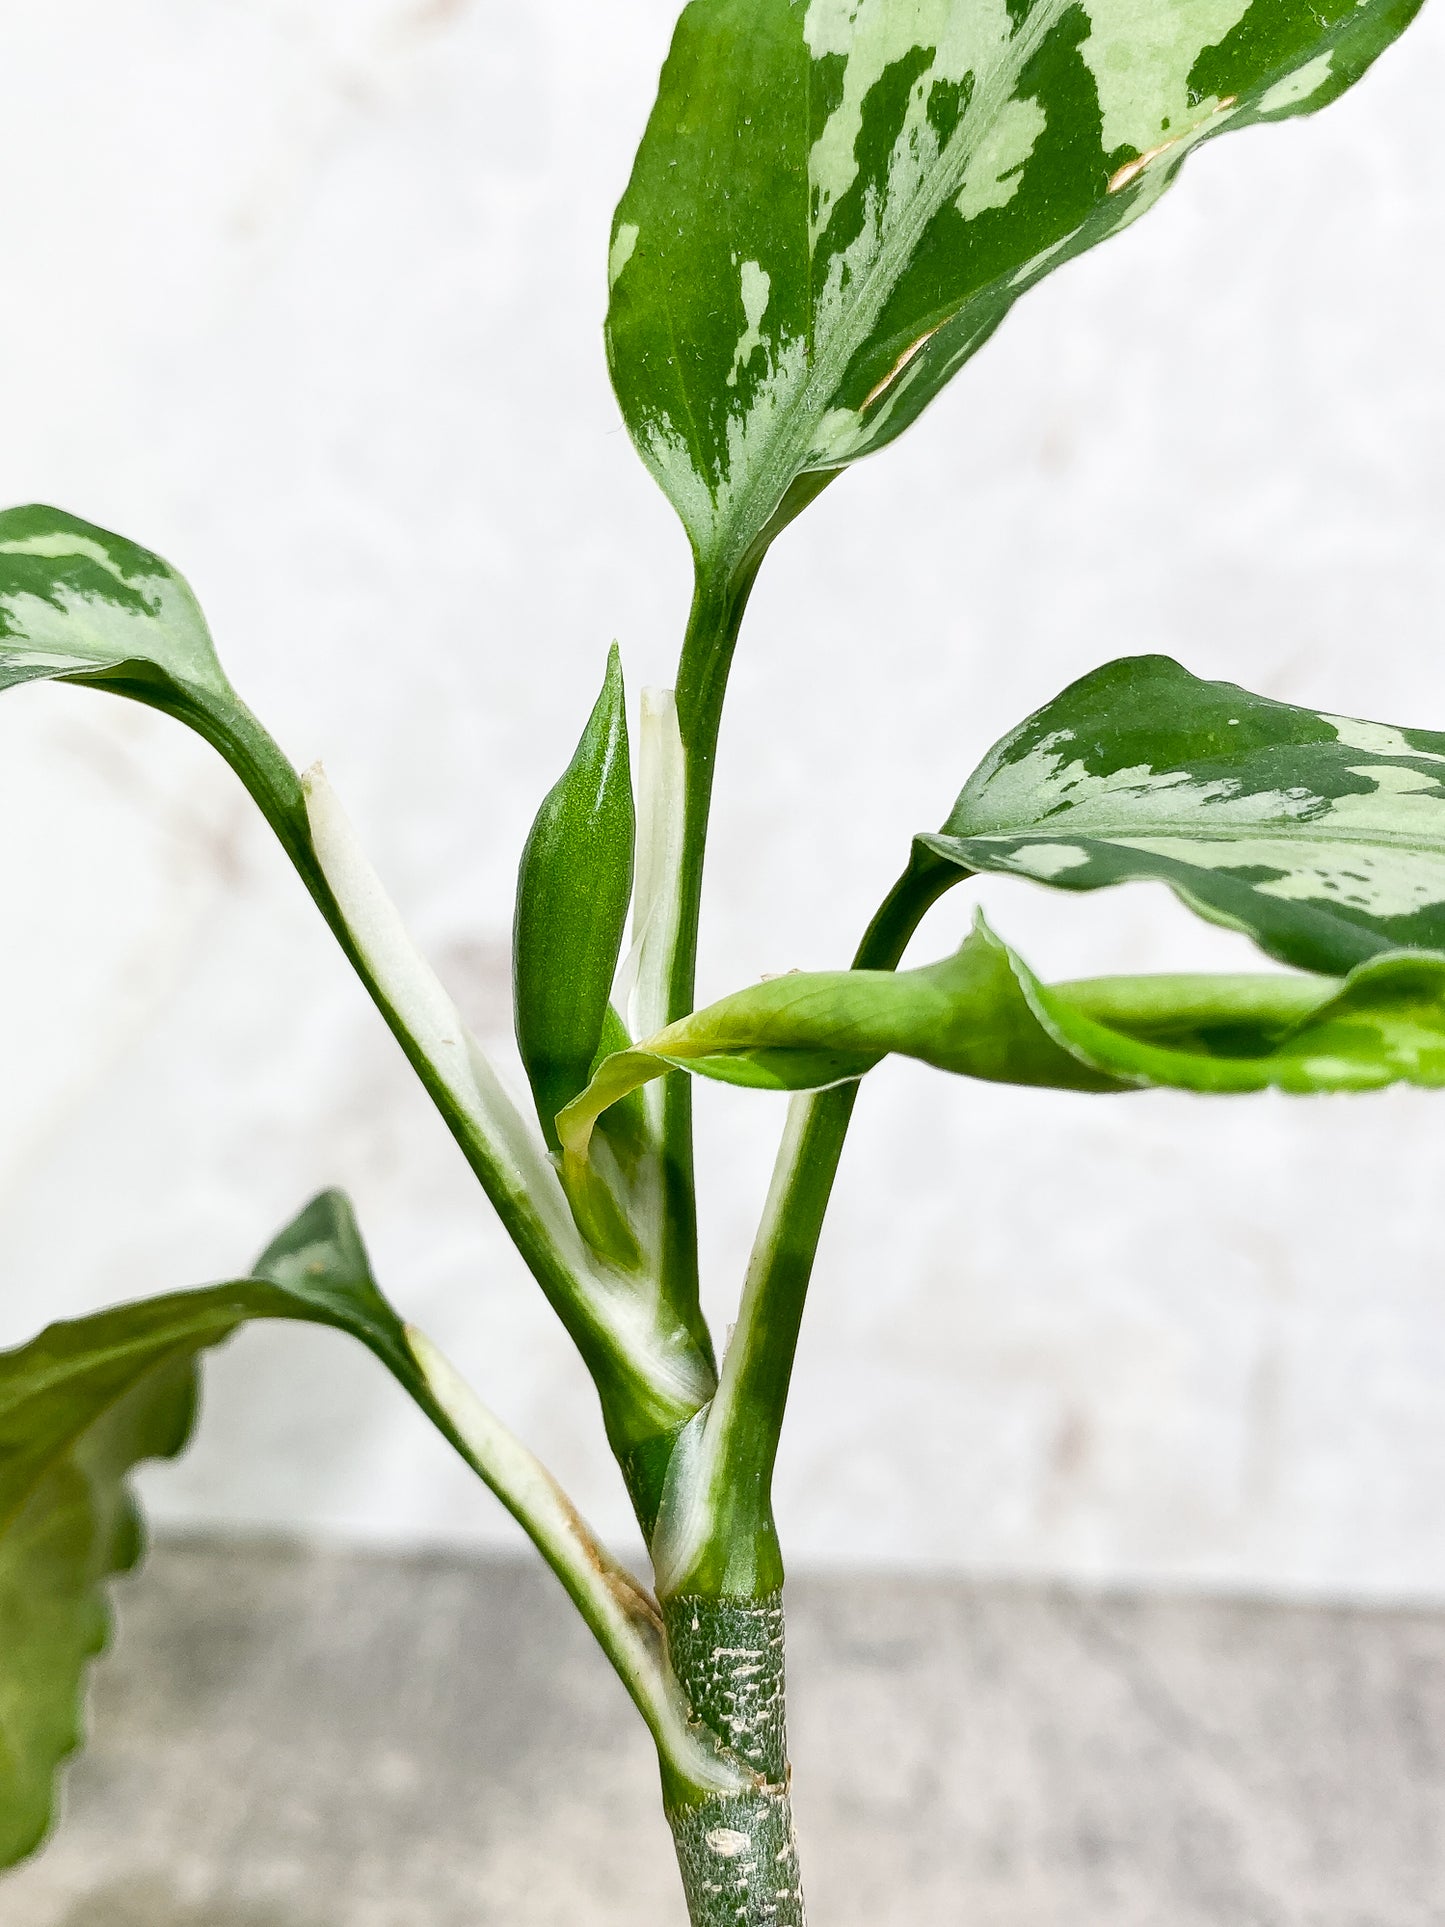 Aglaonema Pictum Tricolor  5 leaves slightly rooted